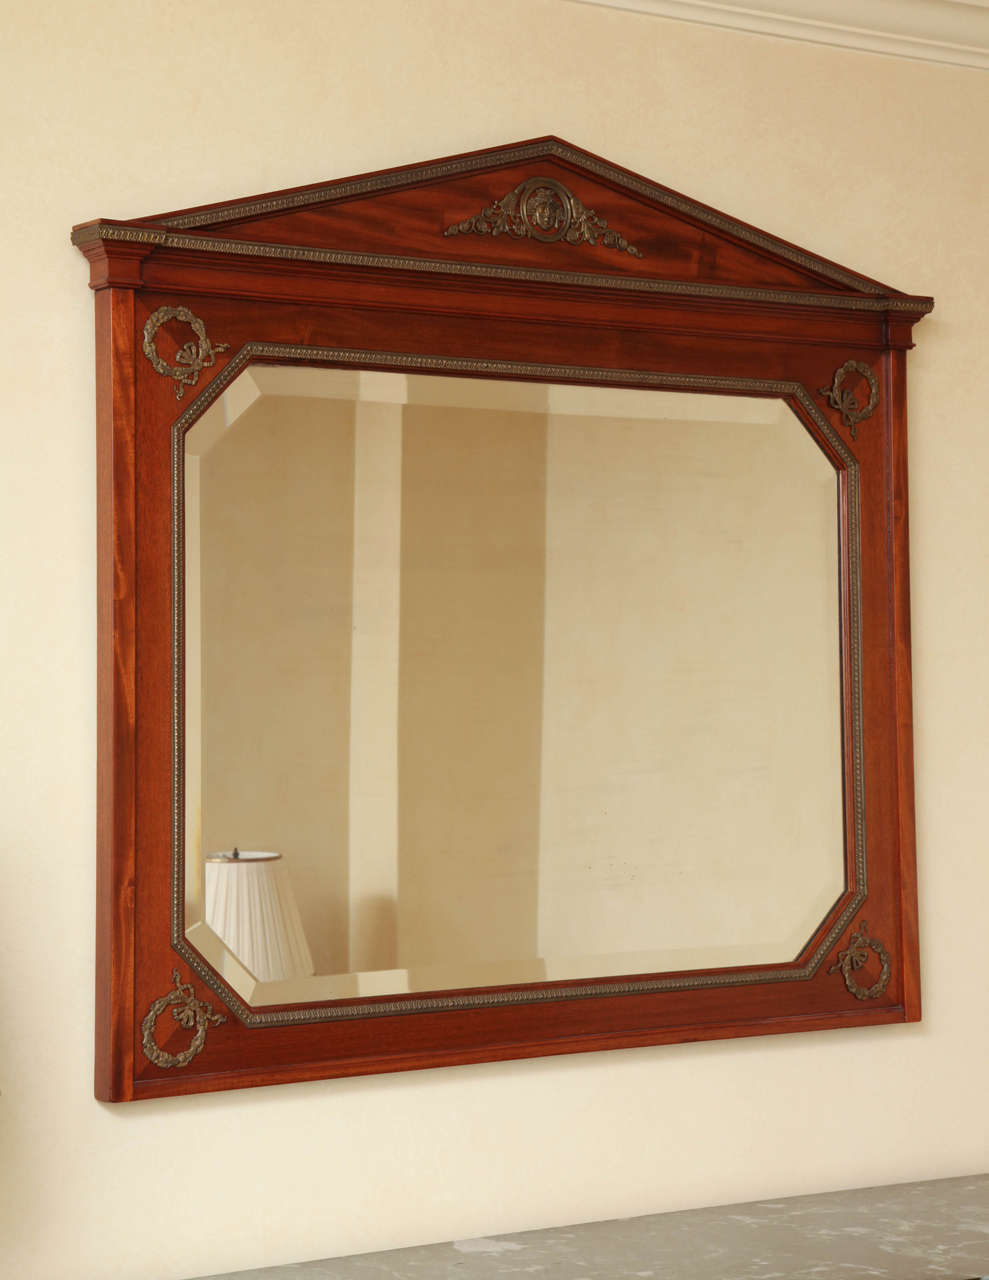 The beveled mirror plate with canted corners within a rectangular frame applied with laurel wreath mounts and foliate banding surmounted by a triangular pediment centered by a Classical mask.